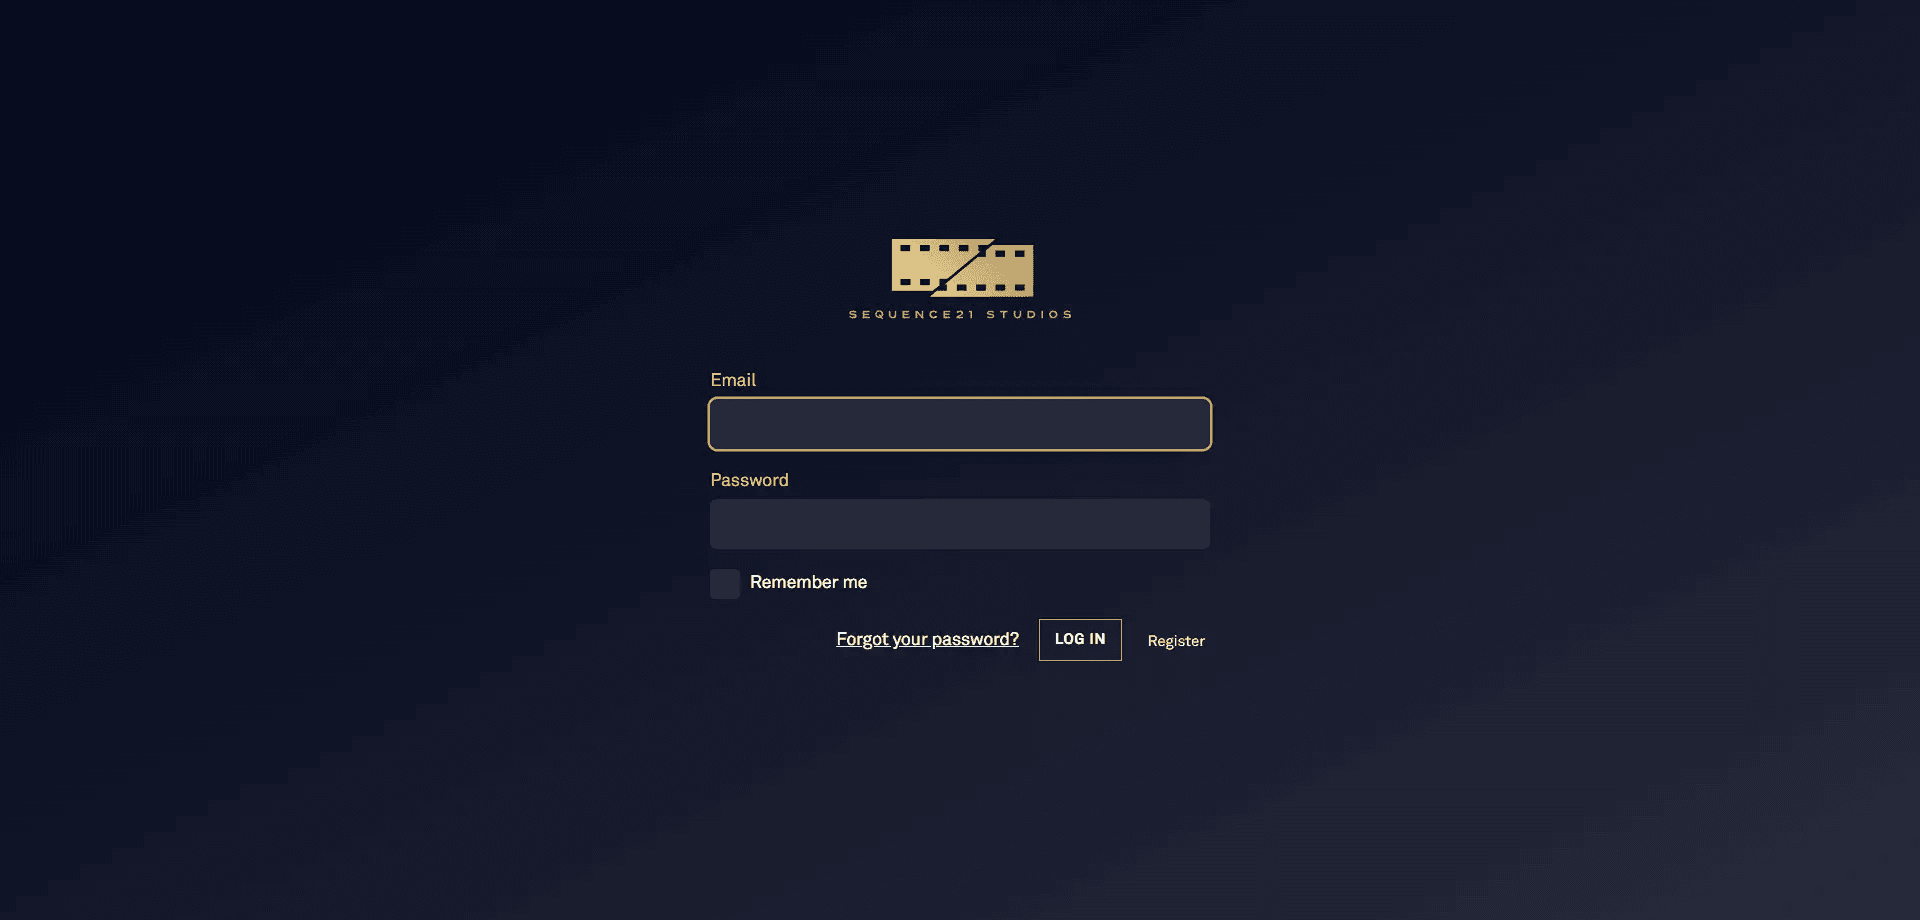 The full-page login form features and elegant email and password input